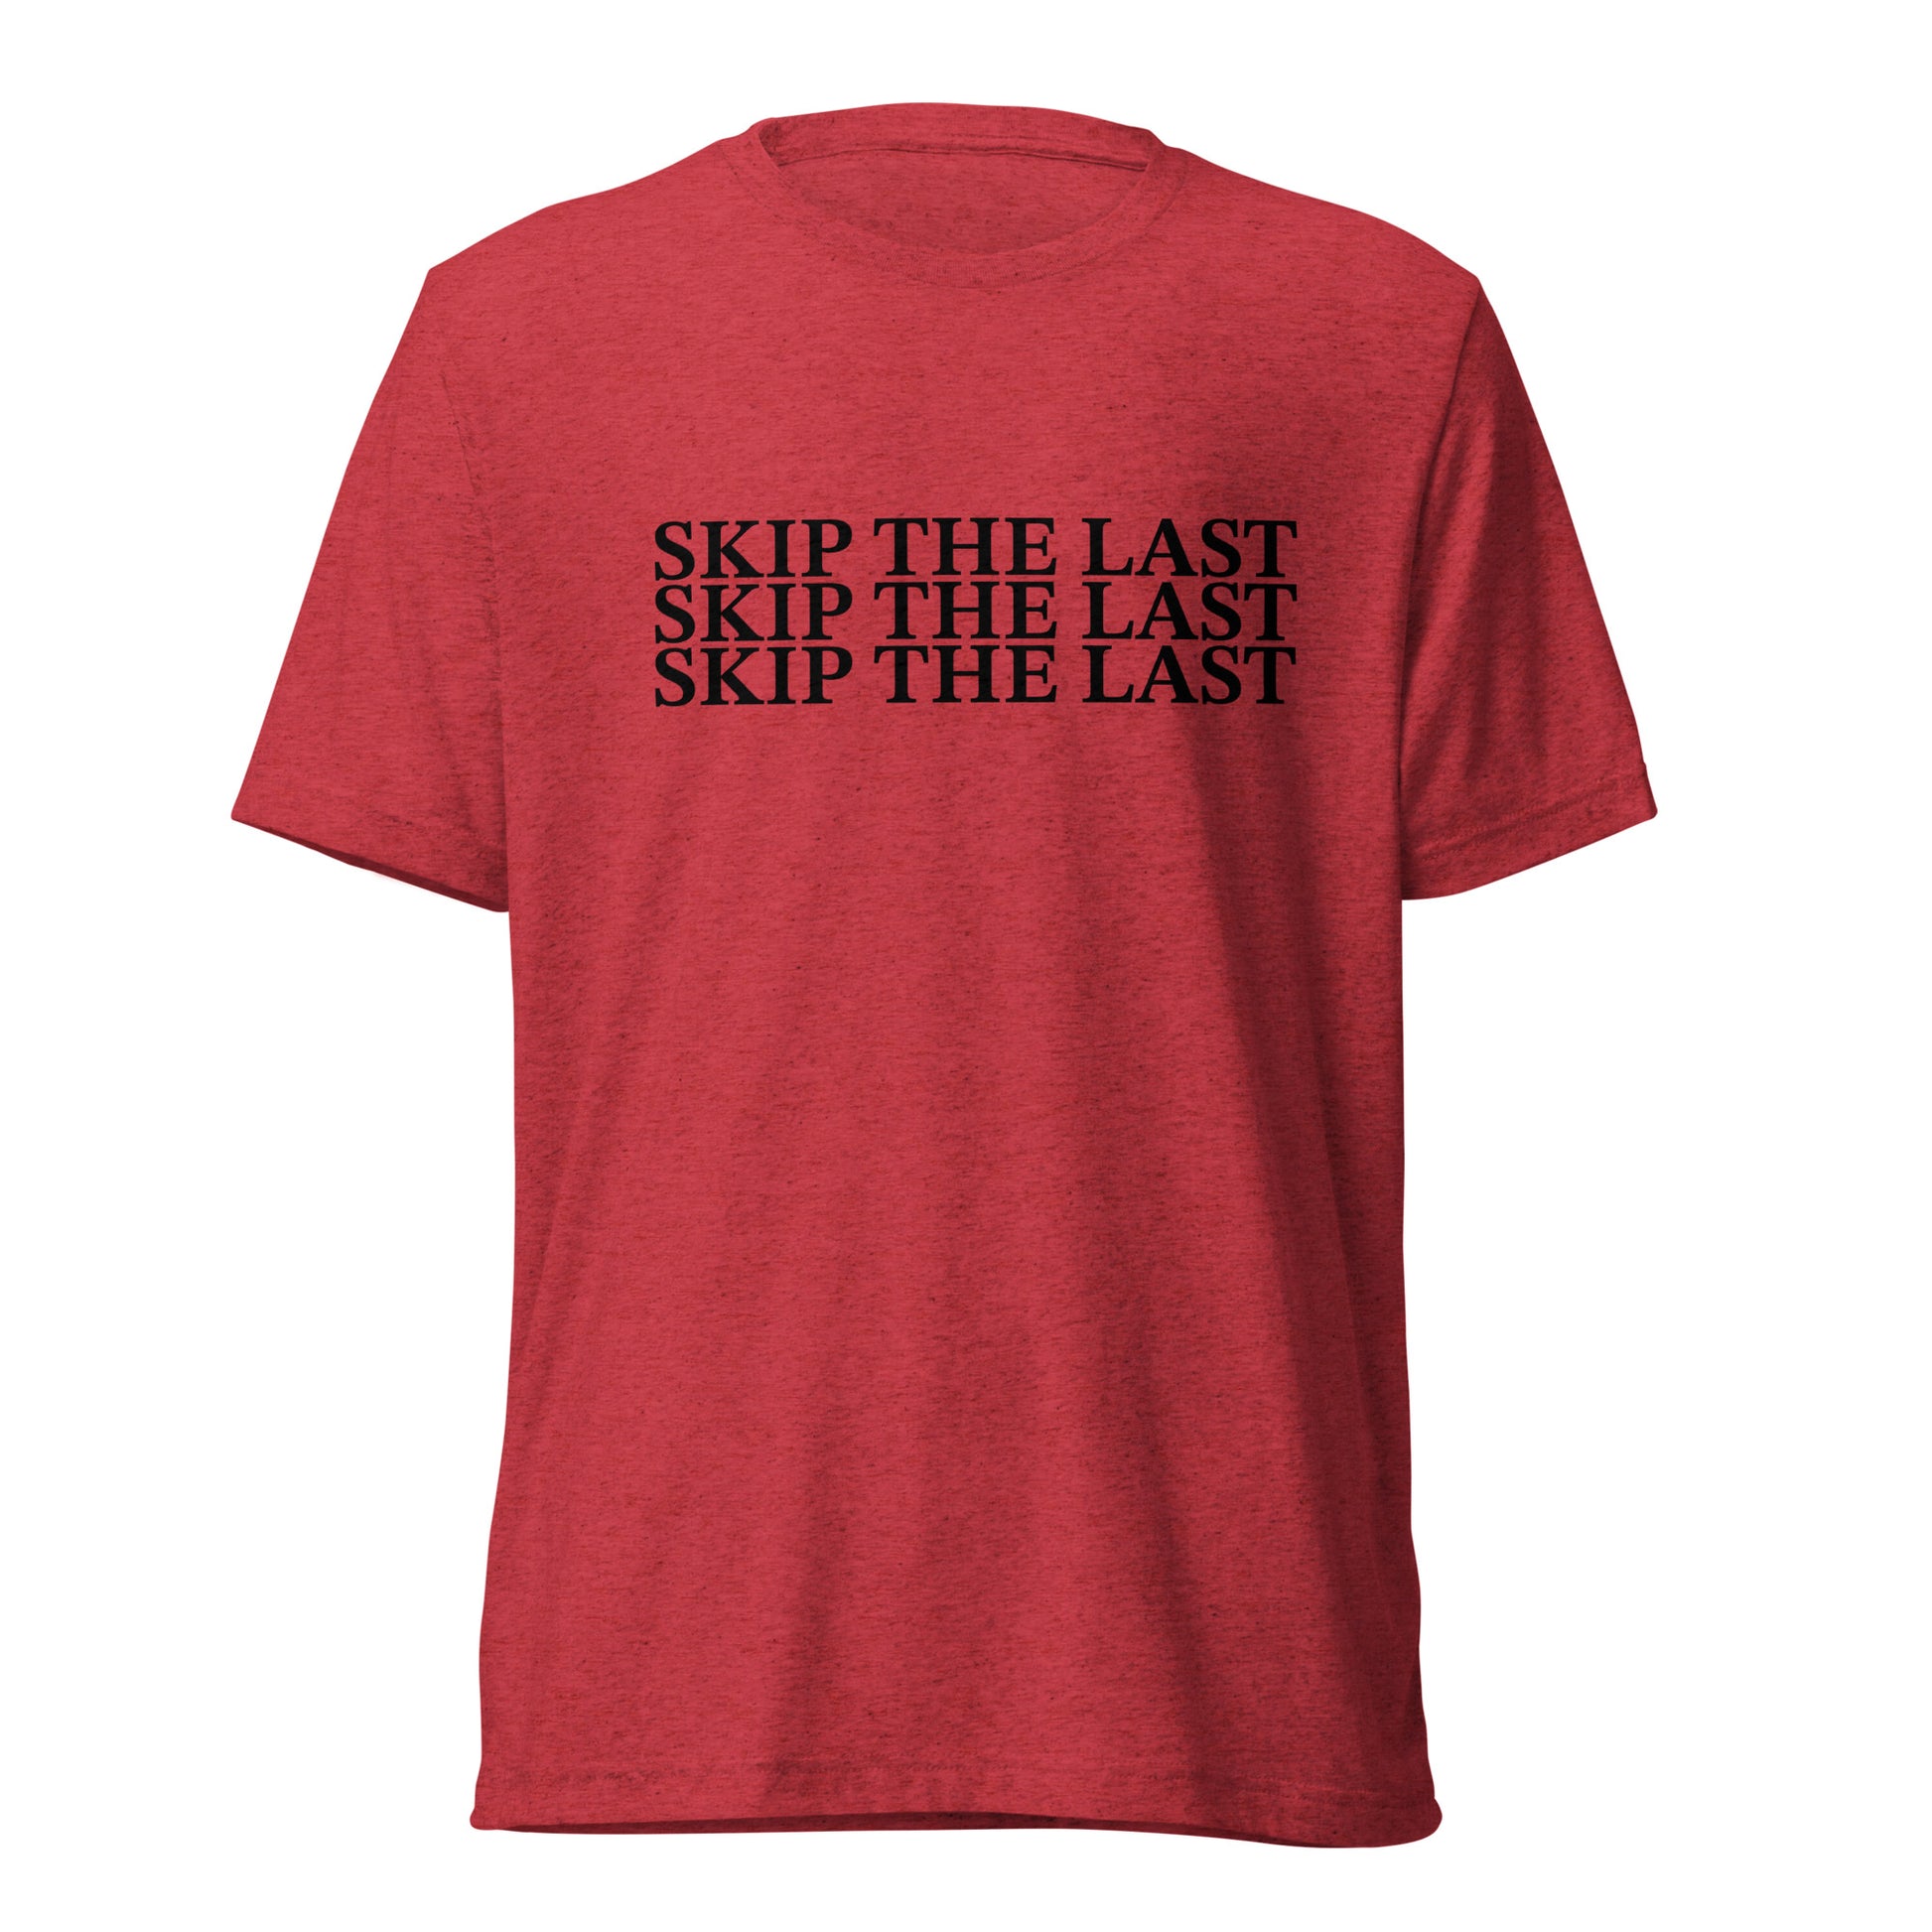 Two More Skip The Last "Skip the Last x3" red unisex tri-blend t-shirt. Front view